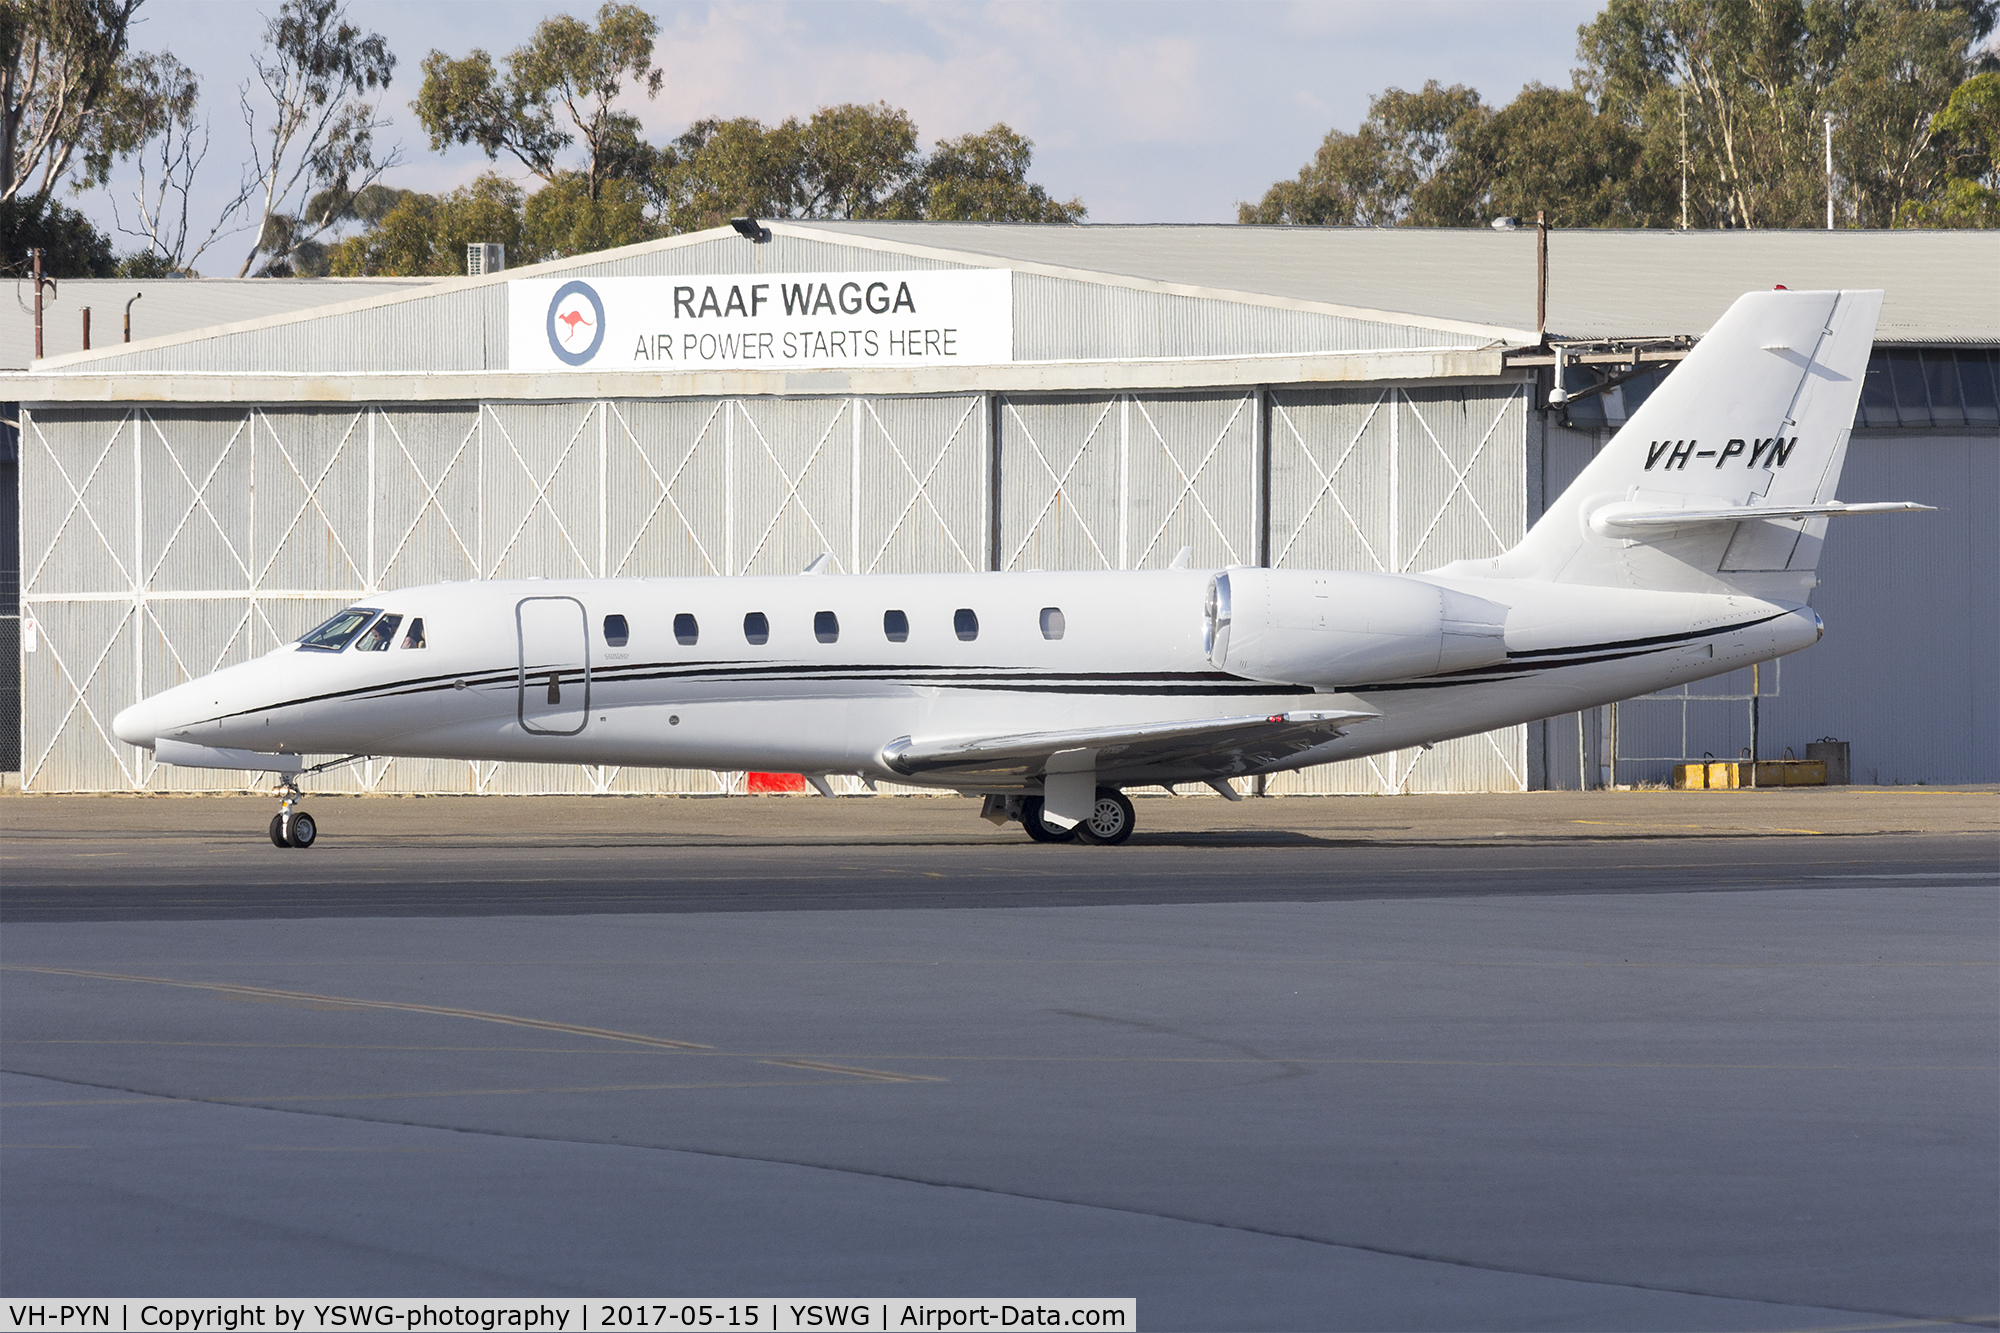 VH-PYN, 2009 Cessna 680 Citation Sovereign C/N 680-0262, Gulf Aircraft (VH-PYN) Cessna 680 Citation Sovereign taxiing at Wagga Wagga Airport